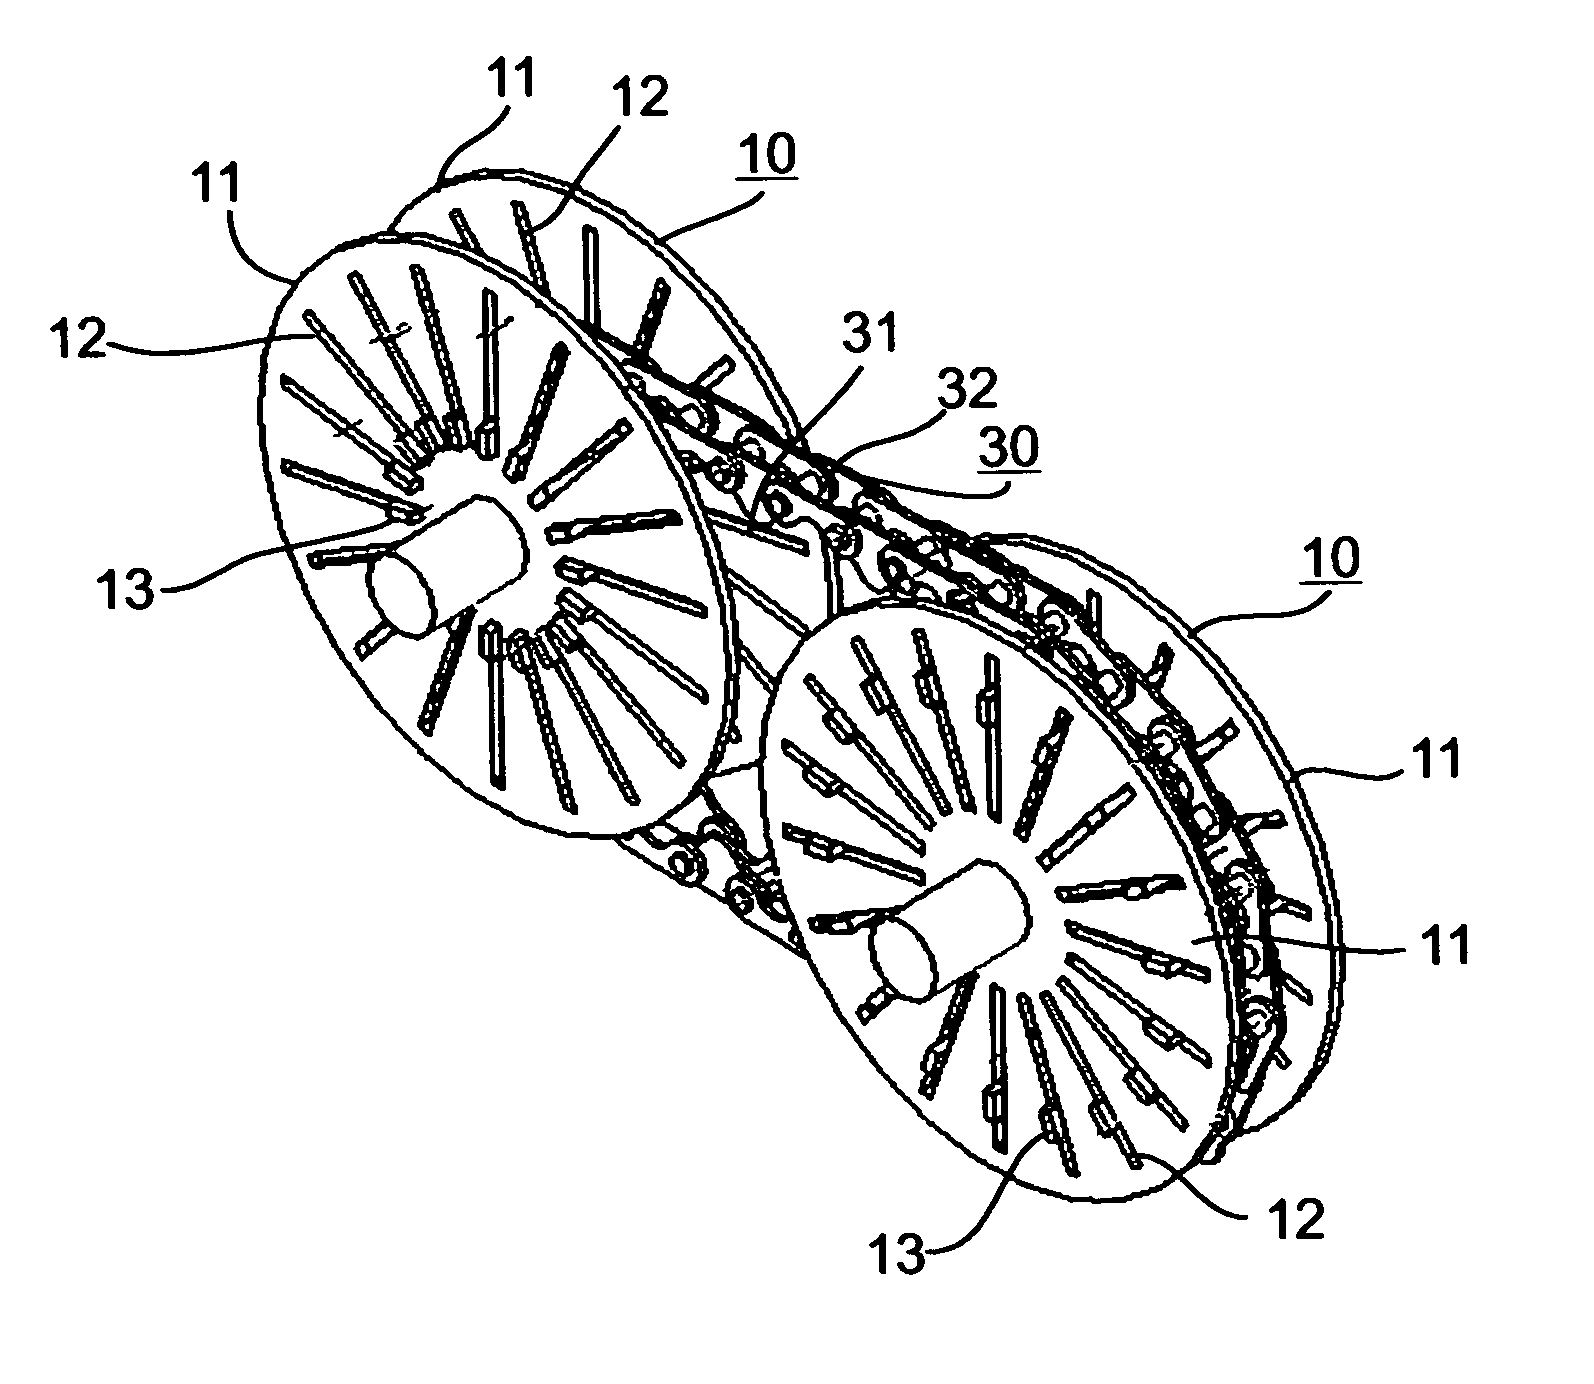 Non-slip transmissions particularly useful as continuously-variable transmissions and transmission members thereof